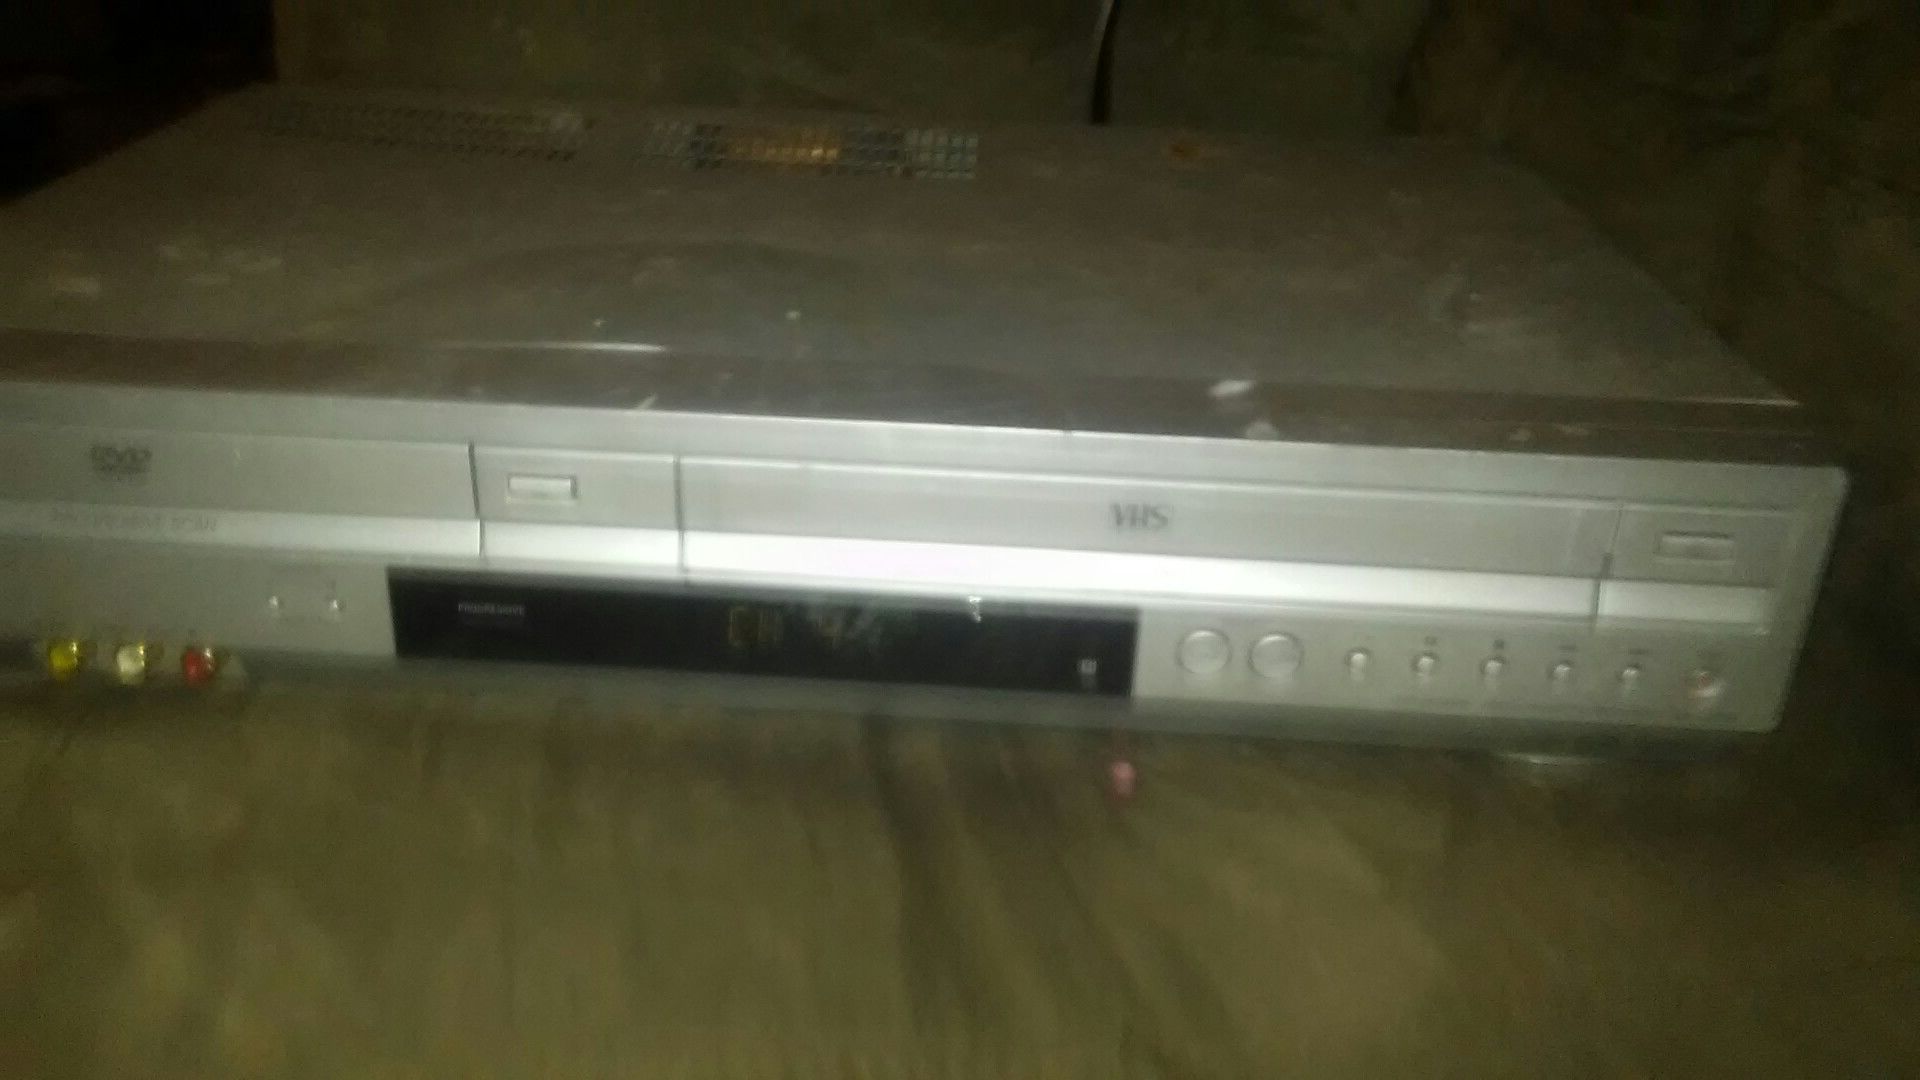 Sony DVD player and vcr combo